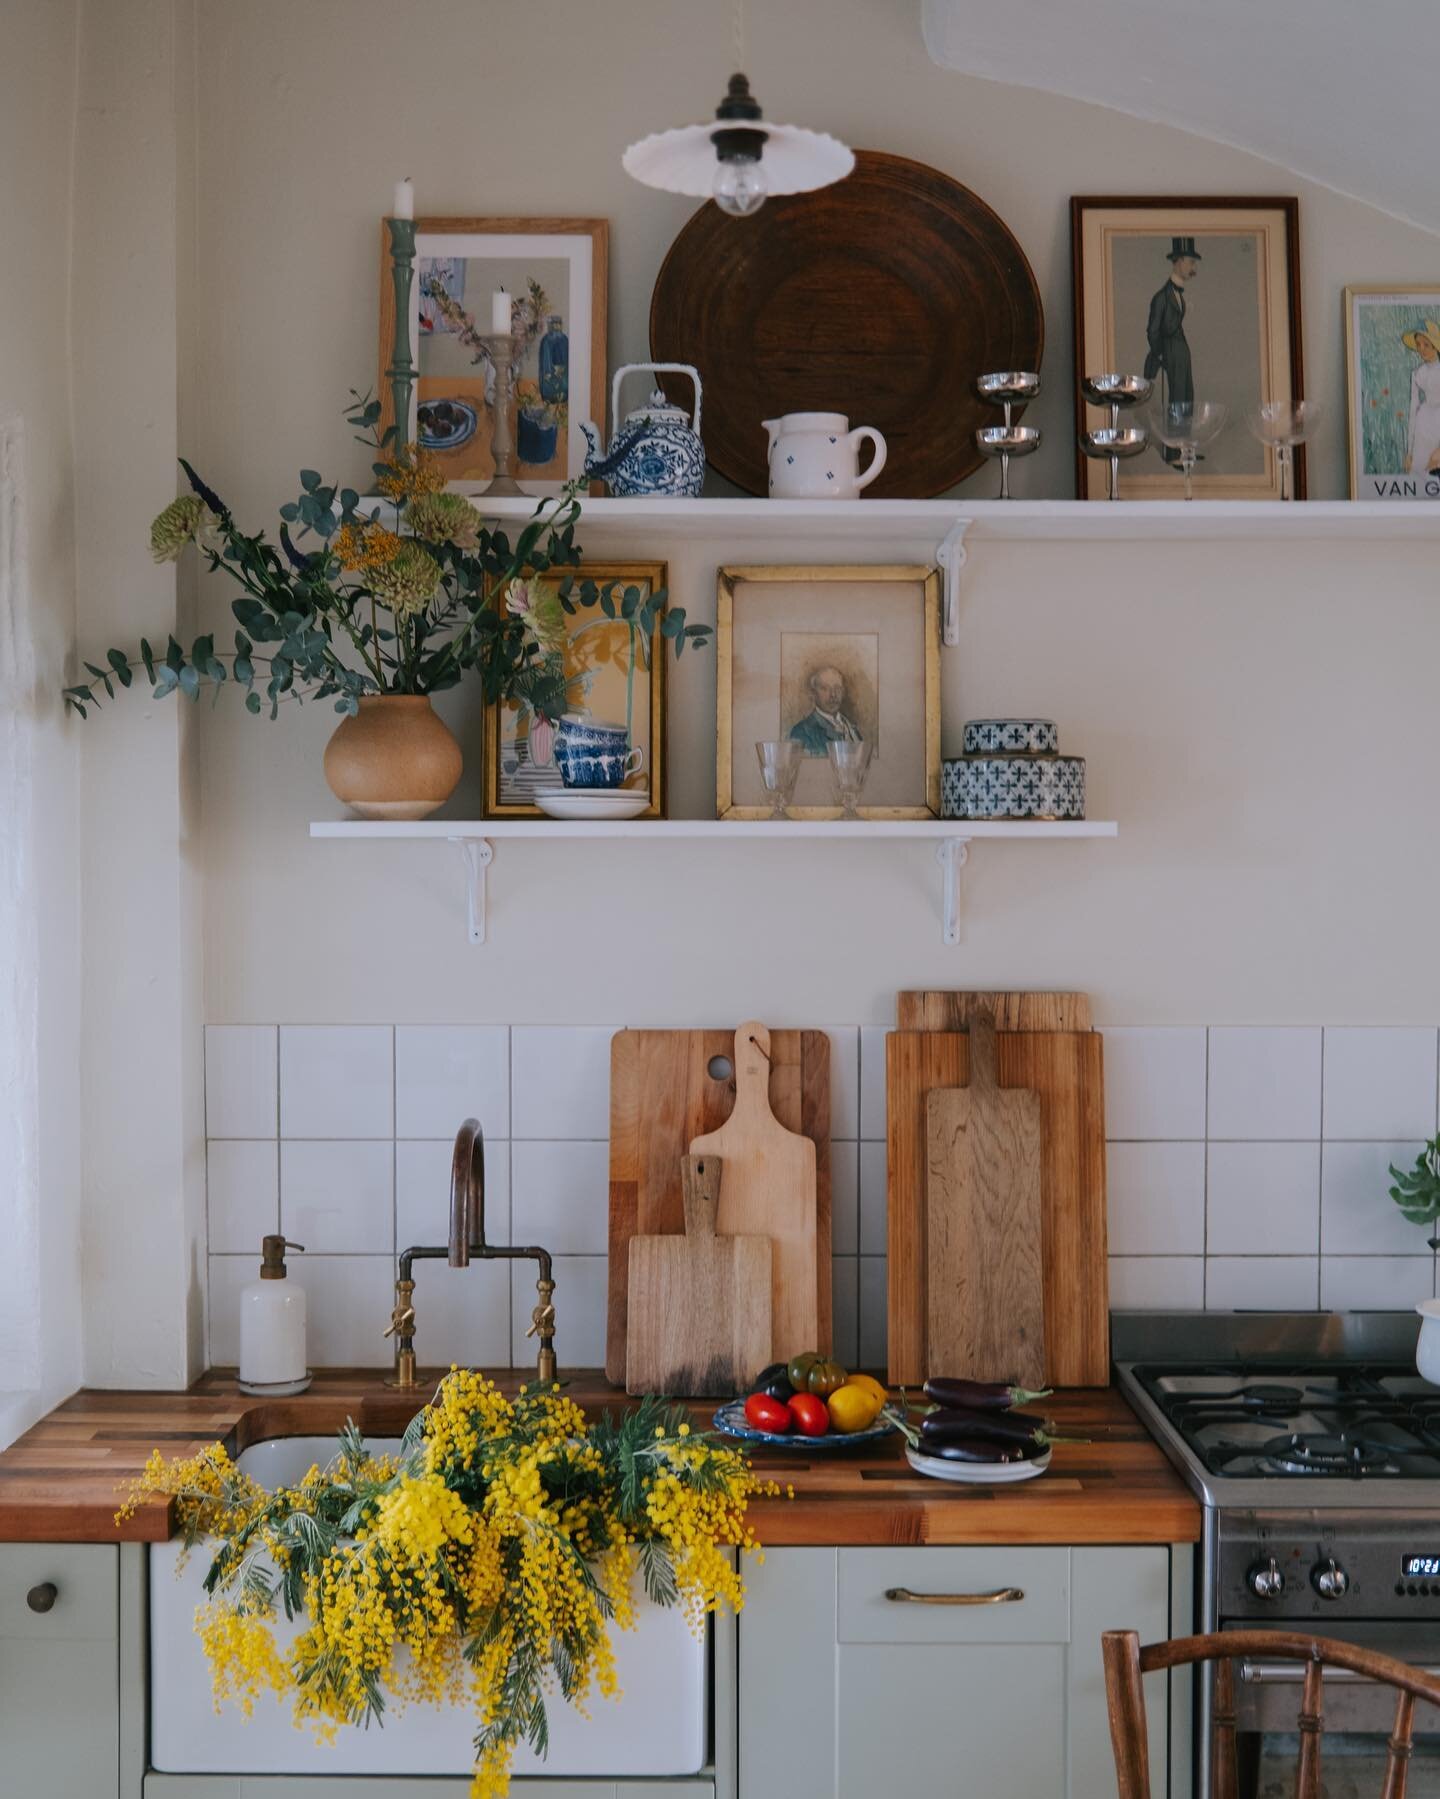 Today the kitchen was filled with flowers and fresh vegetables. The smell of mimosa spread through the house and I sat down to write a very honest, yet incredibly hard blog about changing career paths (link in bio). It&rsquo;s a question that tends t